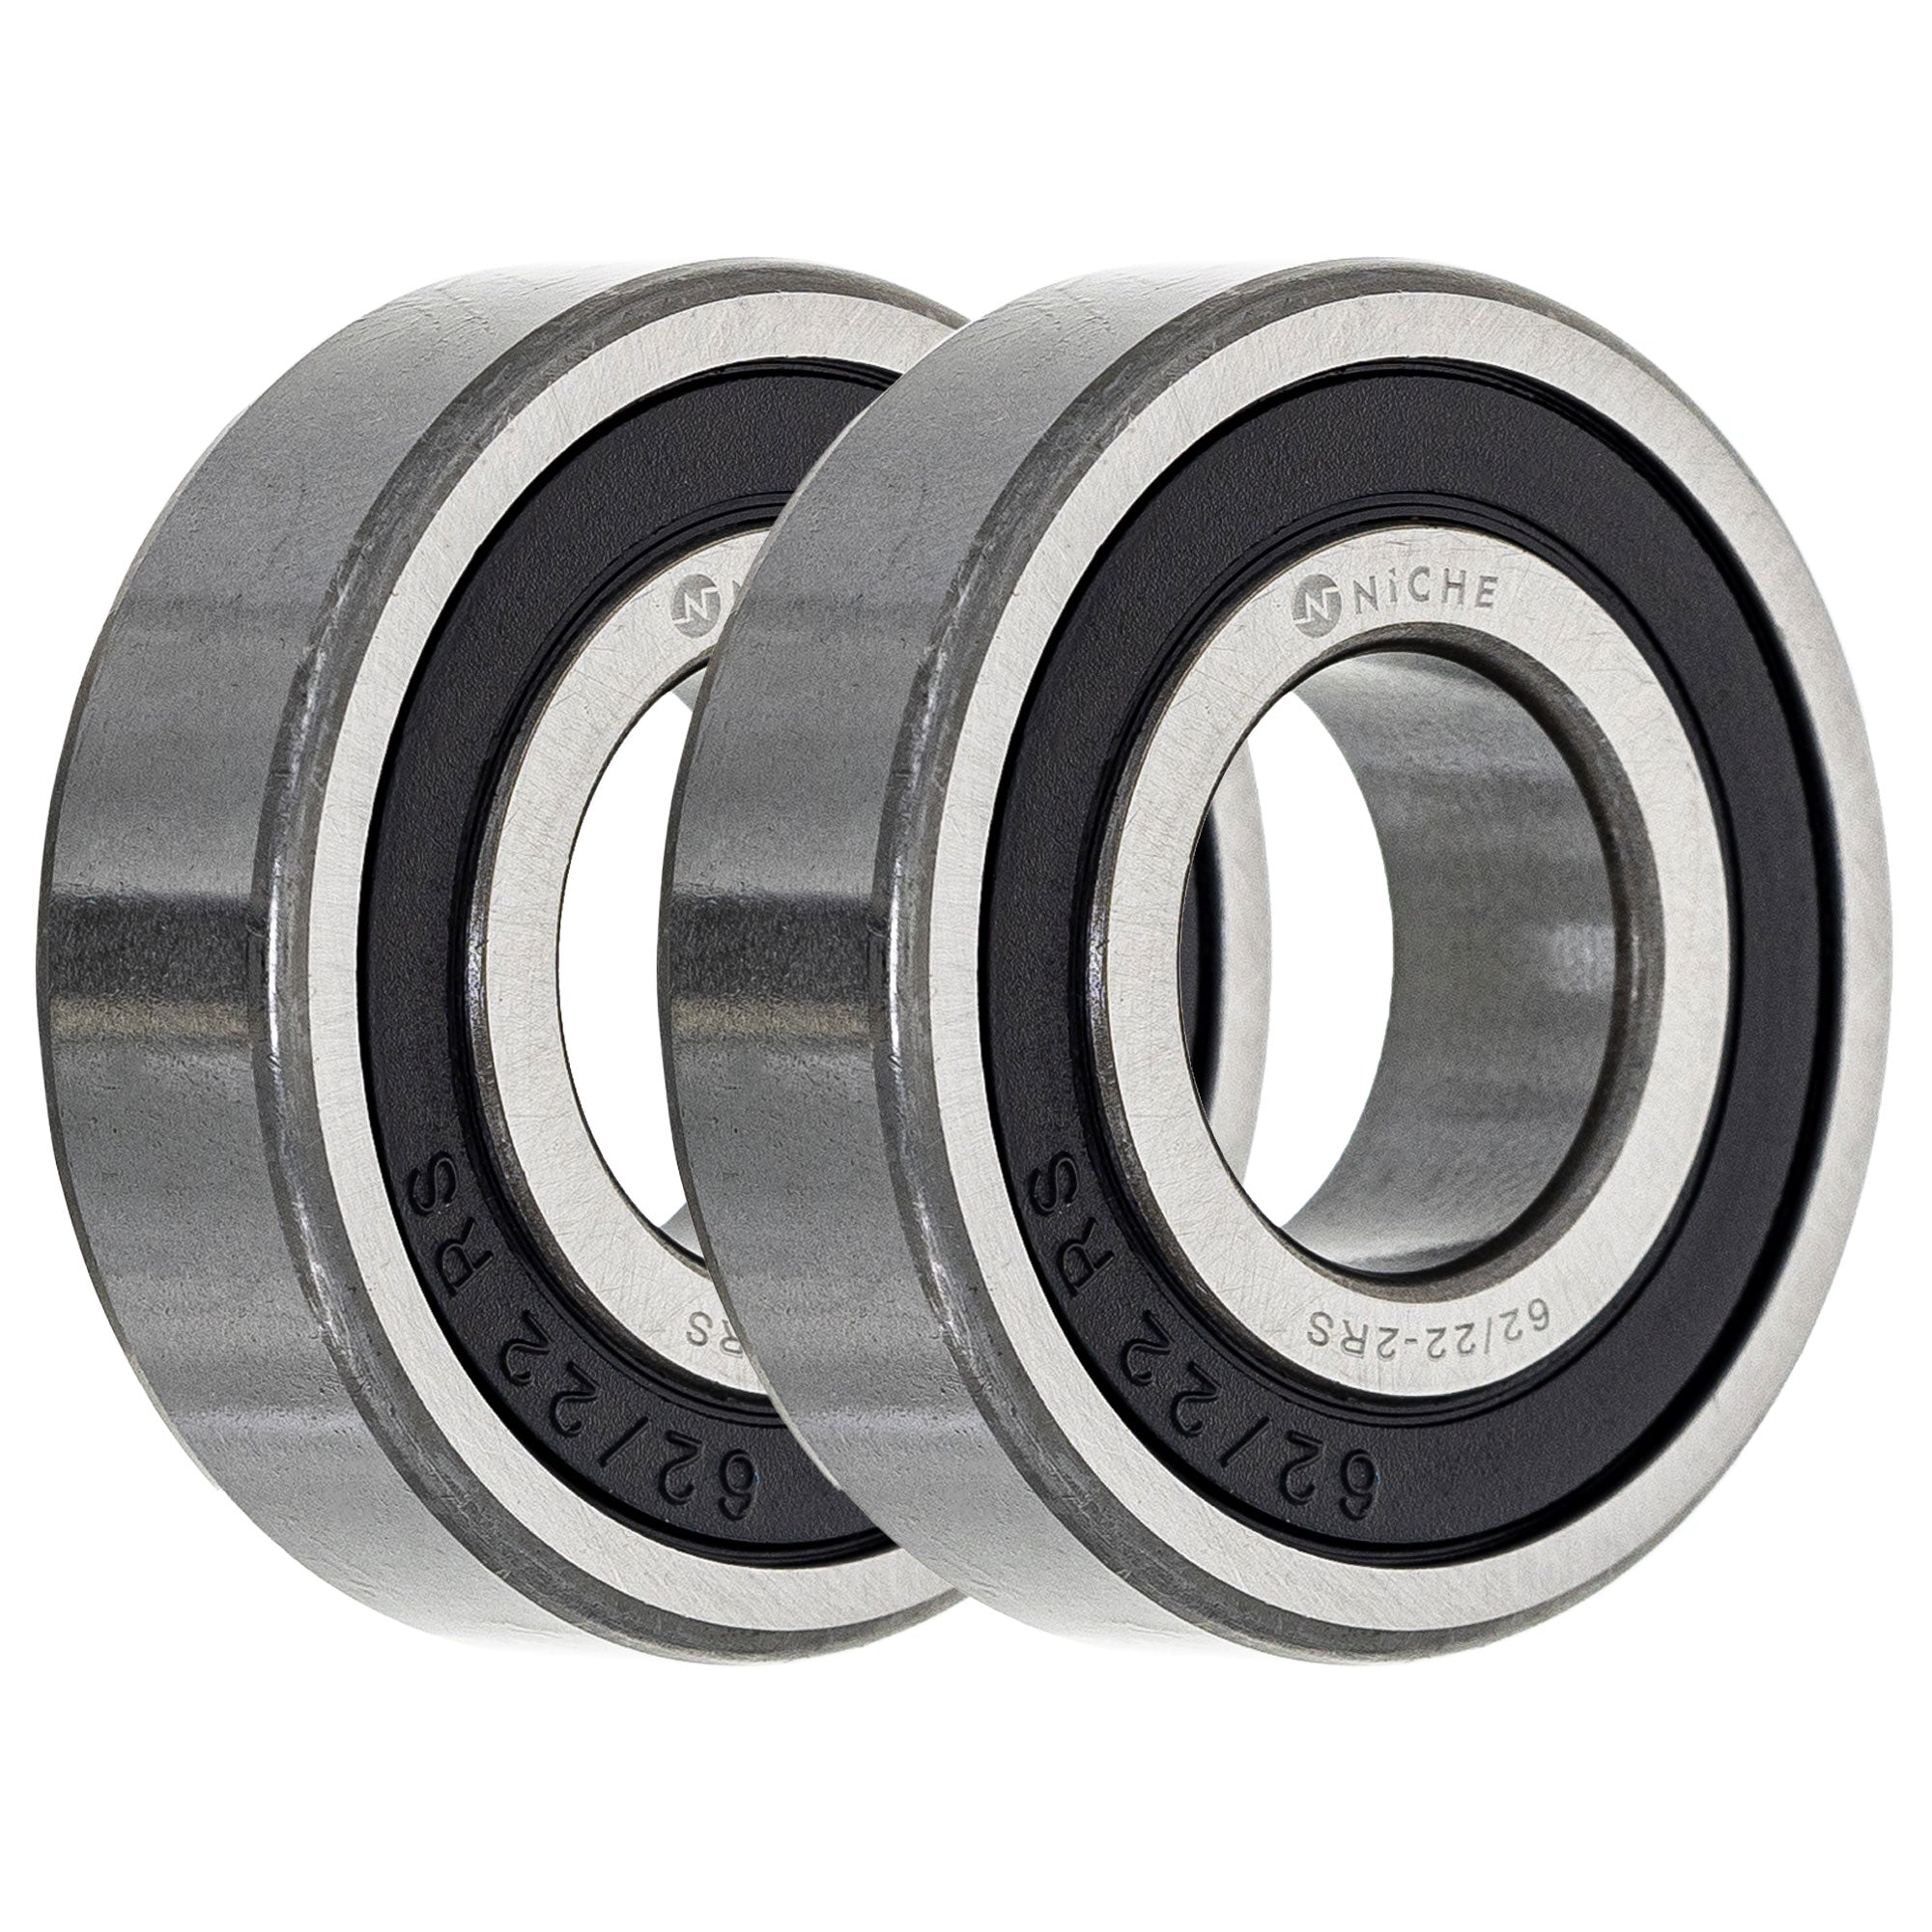 Single Row, Deep Groove, Ball Bearing Pack of 2 2-Pack for zOTHER Valkyrie Super ST1300 NICHE 519-CBB2271R